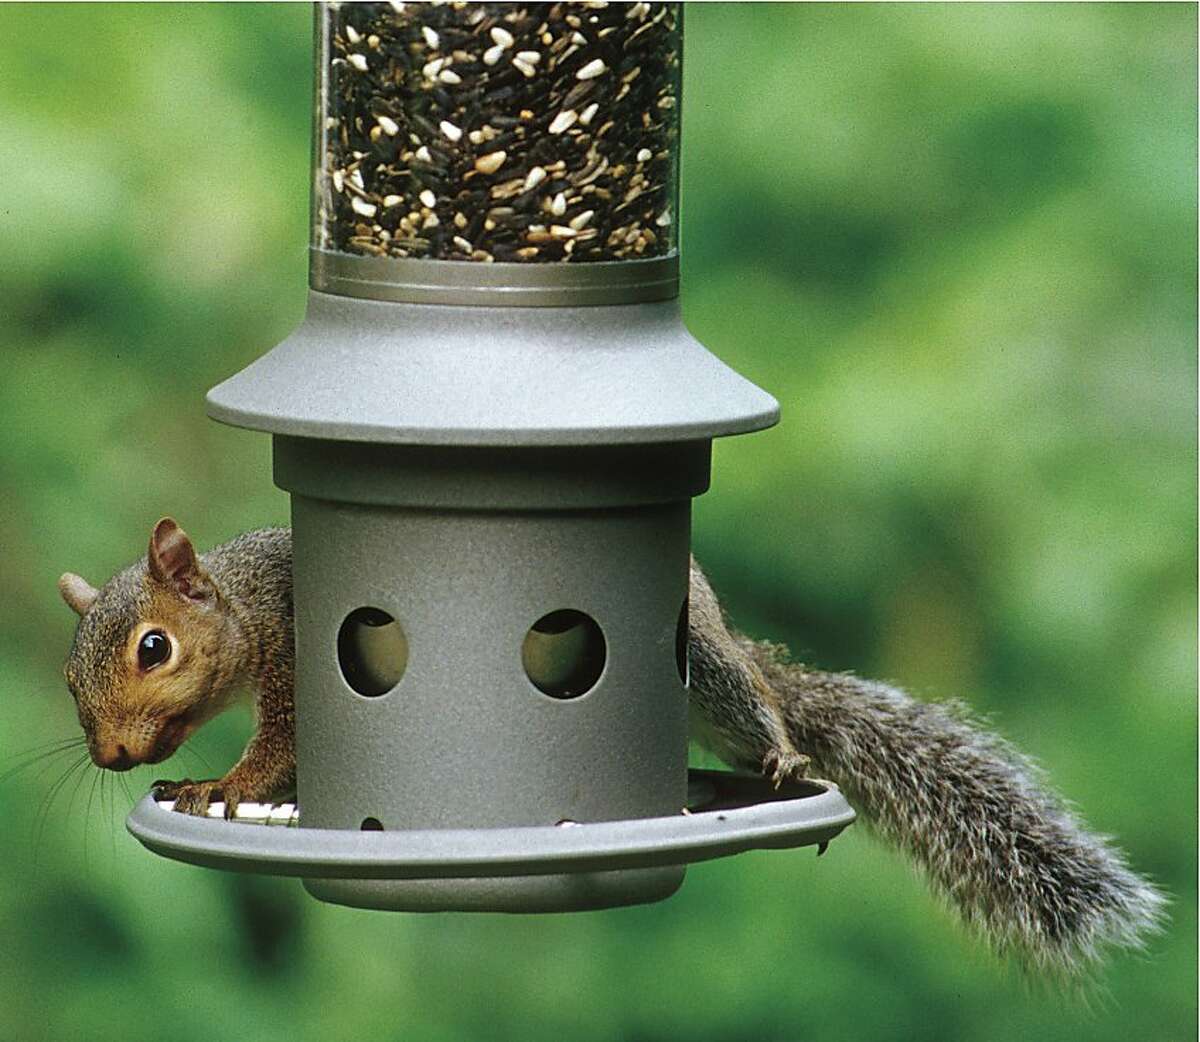 This photo provided by Wild Birds Unlimited shows a squirrel attempting to eat bird seed on an Eliminator, a squirrel-proof bird feeder. It protects your bird seed from persistent squirrels by technology registering sensitivity set by the owner, that closes the seed ports based on weight of the intruder standing on the perch ring. (AP Photo/Wild Birds Unlimited)